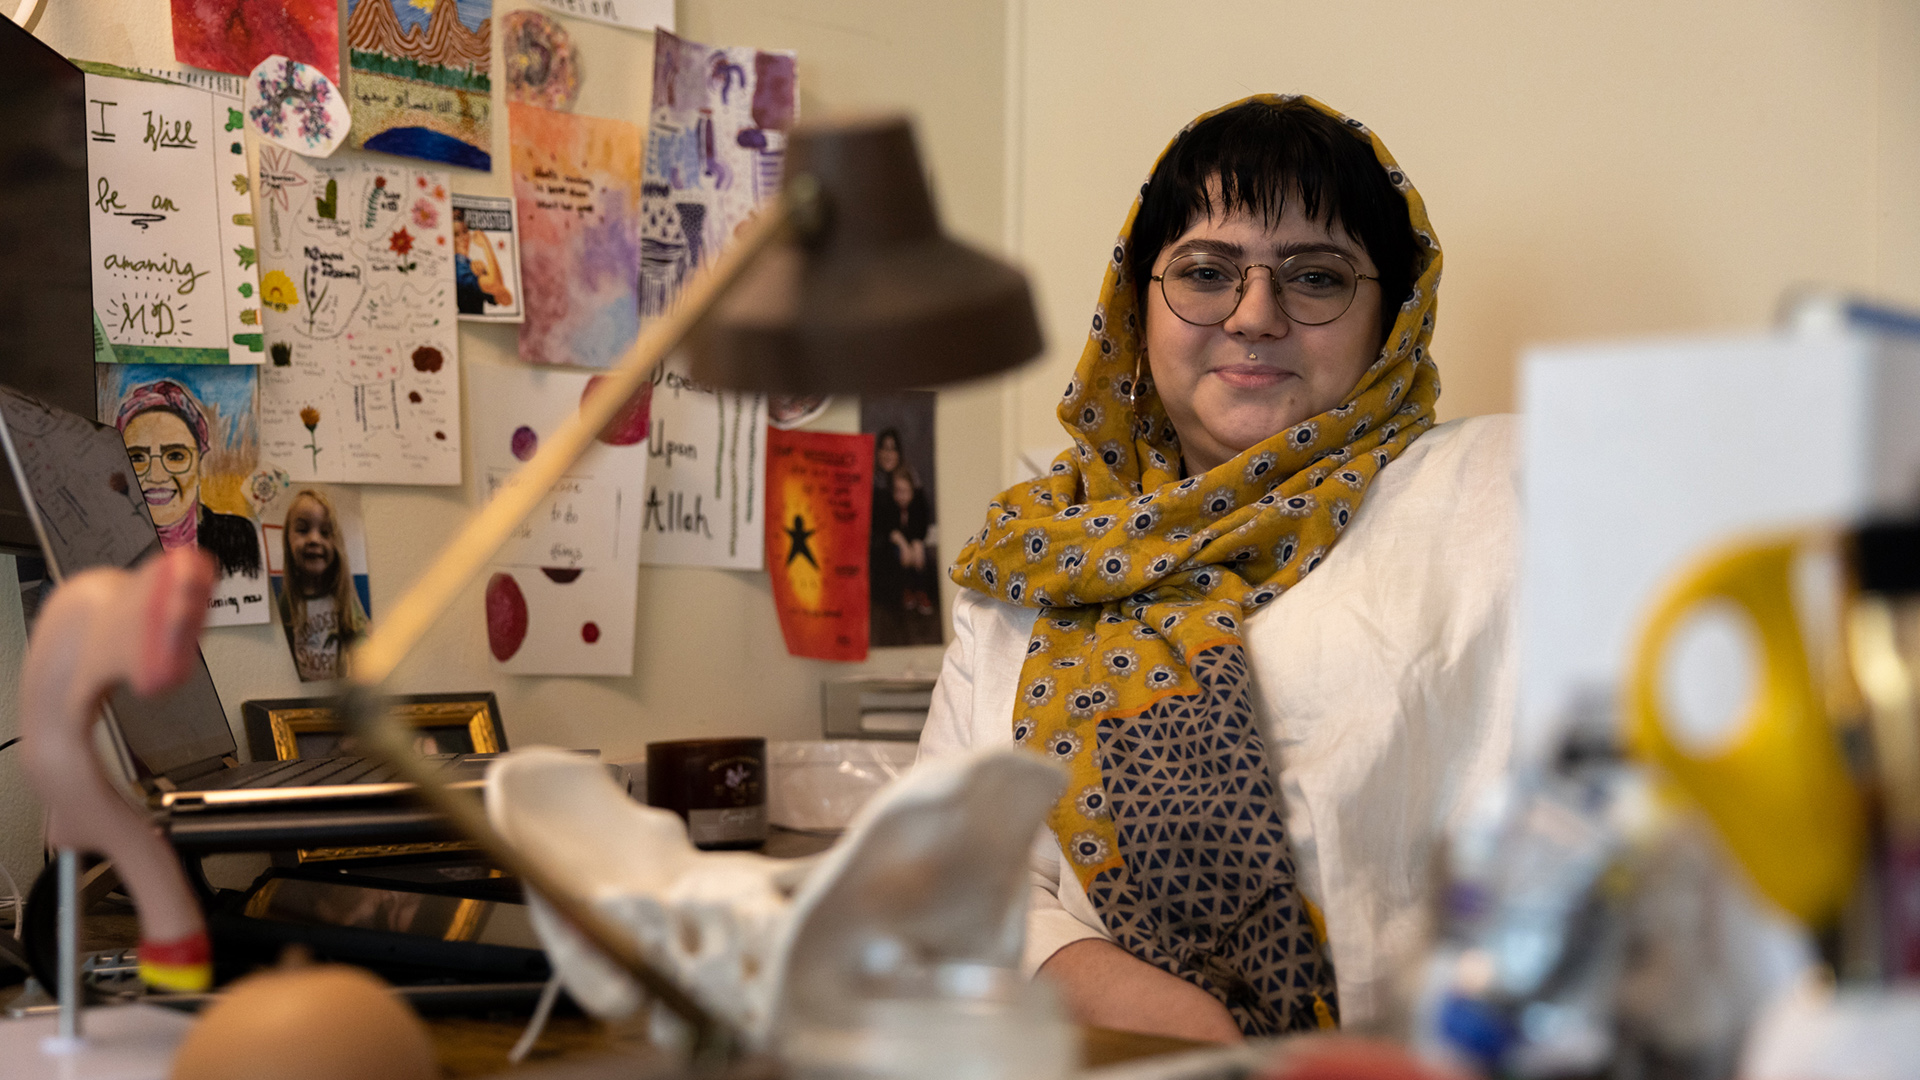 Hanan Jabril poses for a portrait while sitting in an office with multiple items on a desk in the foreground and various hand-drawn illustrations and photos attached to a wall in the background.